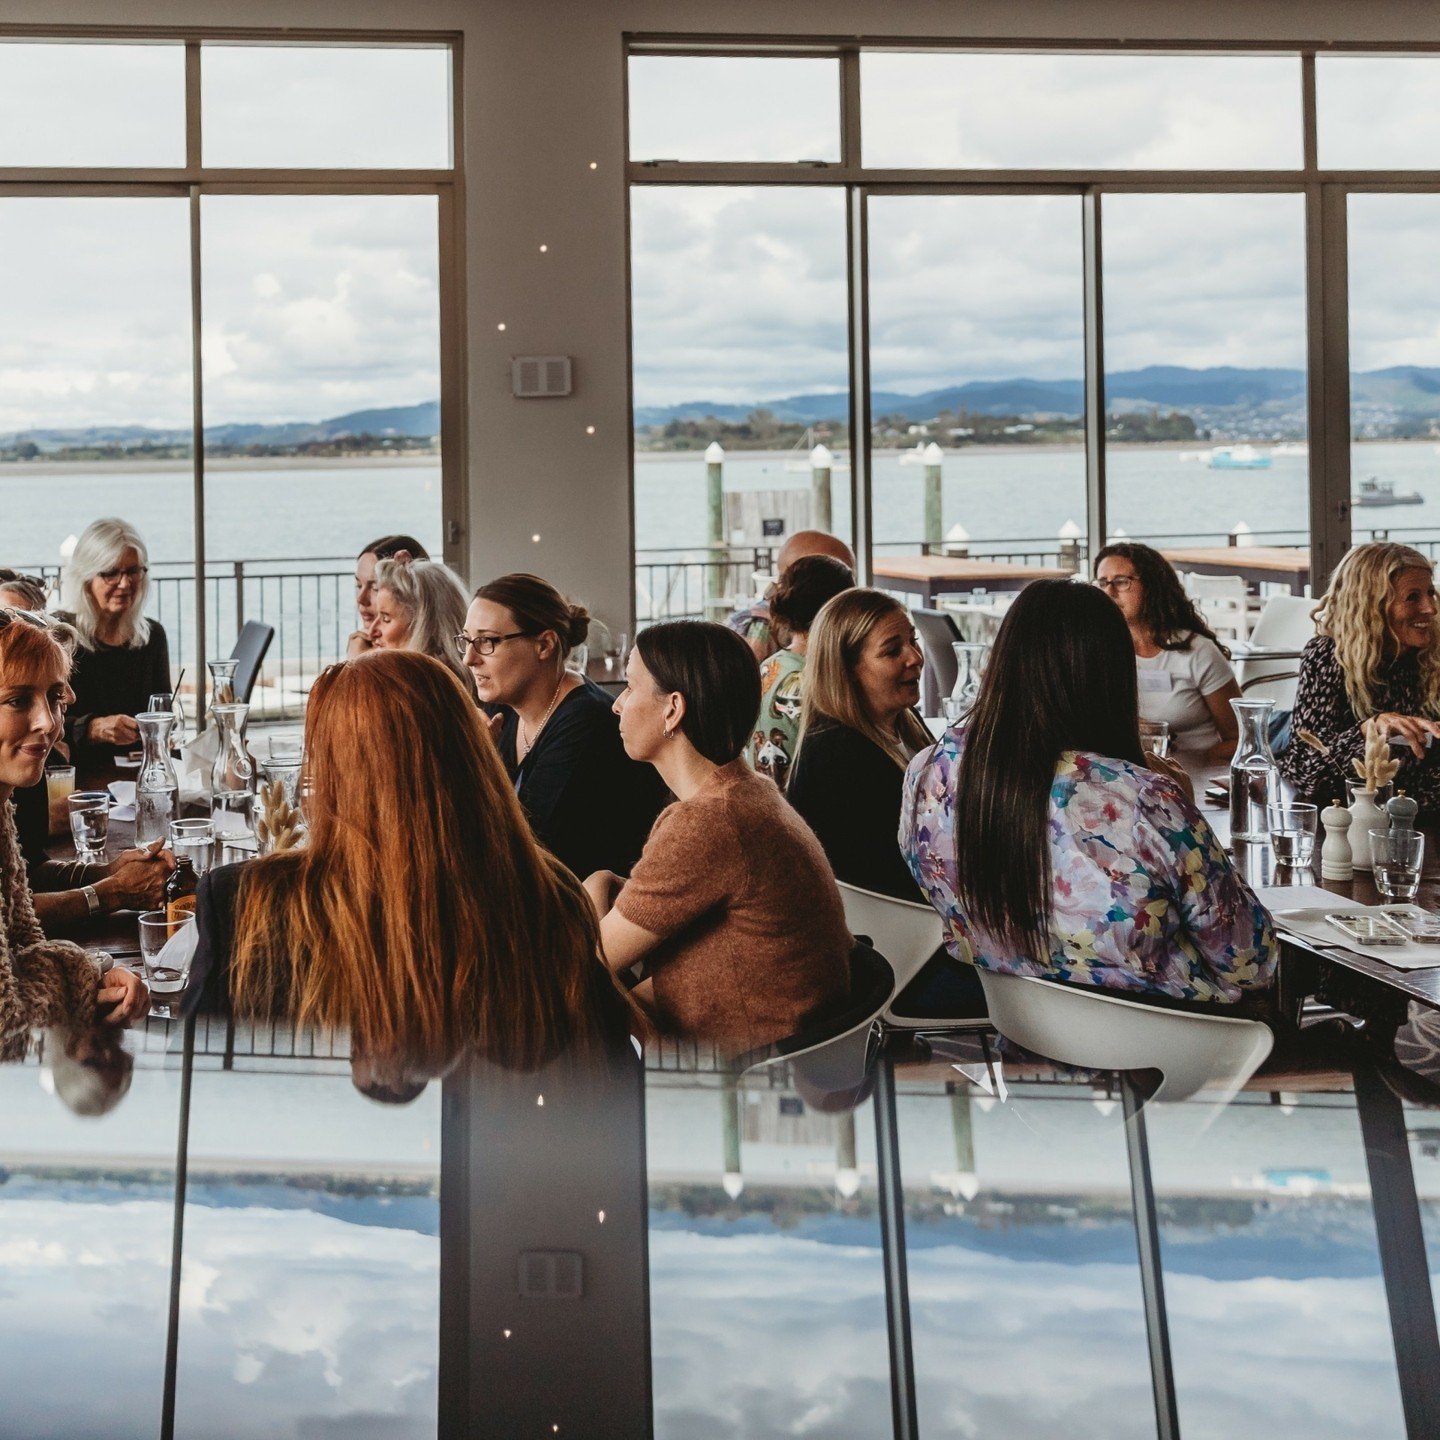 @creative.bop hosted their 10th Creative Connections Event at the restaurant at Trinity Wharf! Such a stunning backdrop for lunch, thanks for choosing us.

Captured beautifully by the talented @annamenendezphotography
.
.
.
#creativelunch #tauranga #